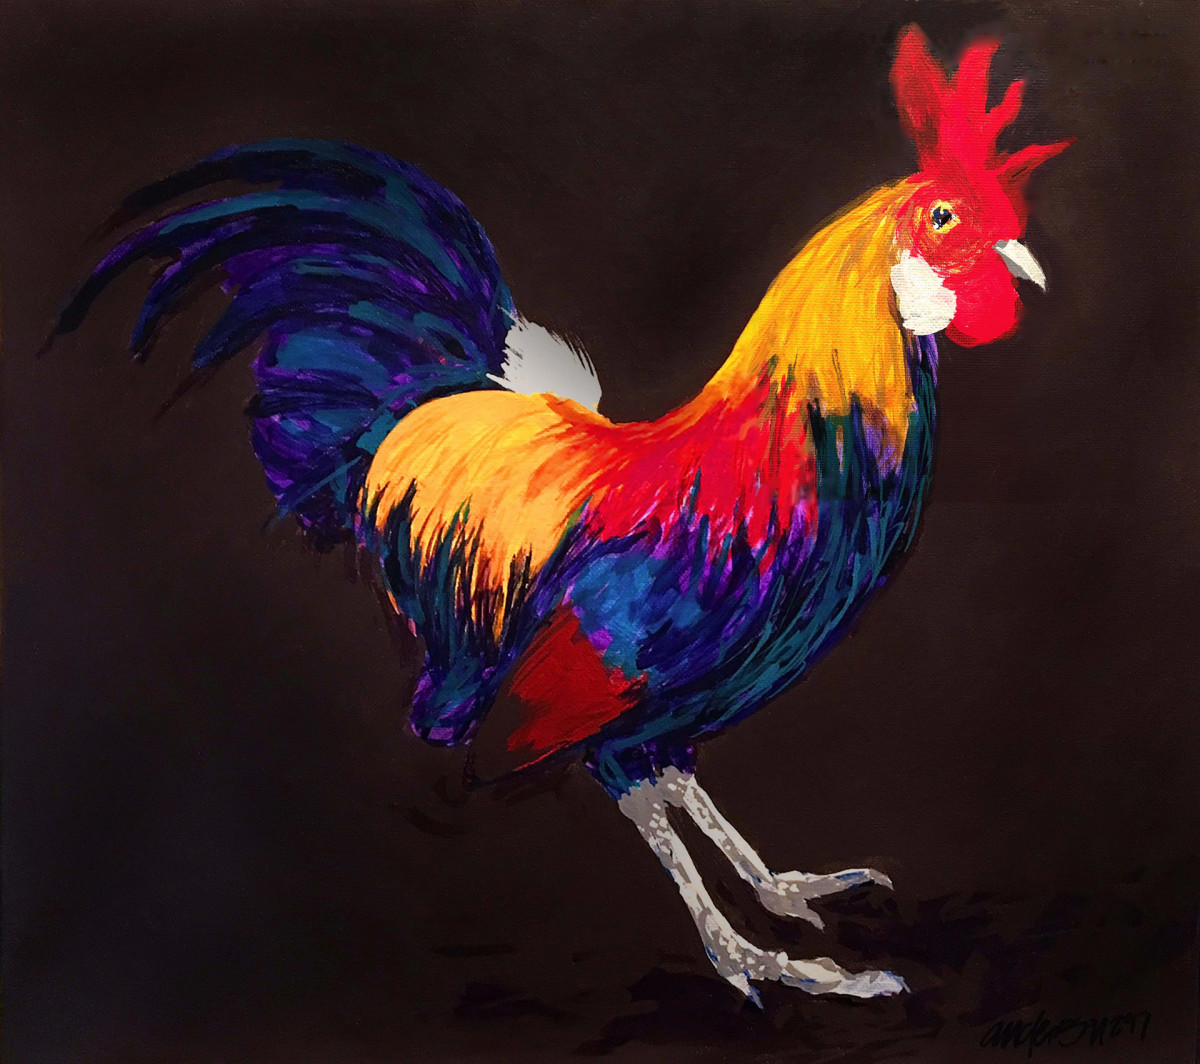 Year of the Rooster, 2017 by Michael Anderson 